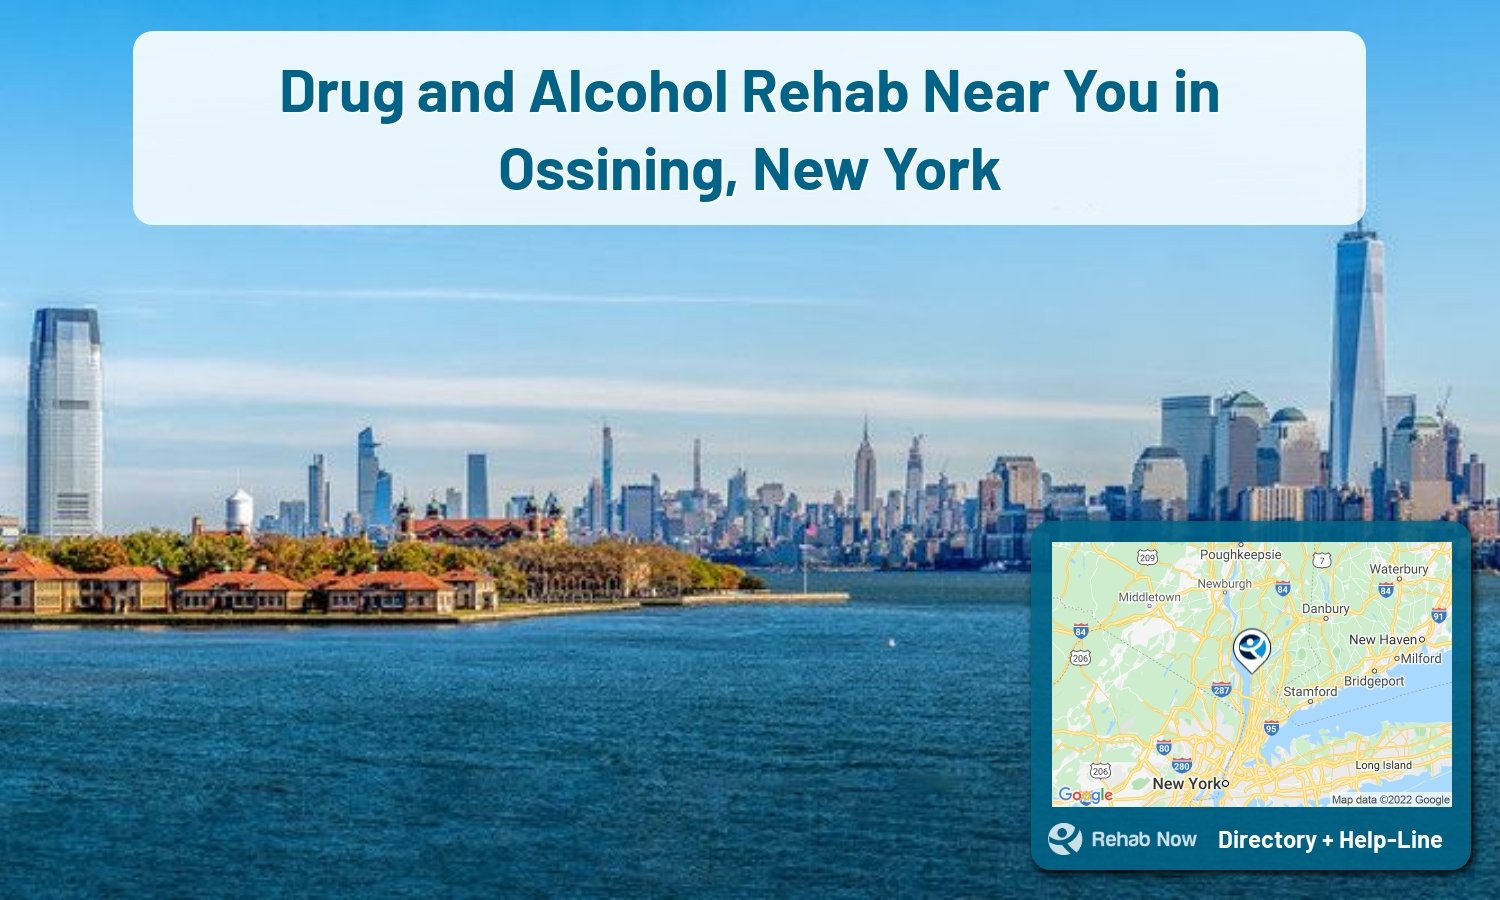 Need treatment nearby in Ossining, New York? Choose a drug/alcohol rehab center from our list, or call our hotline now for free help.